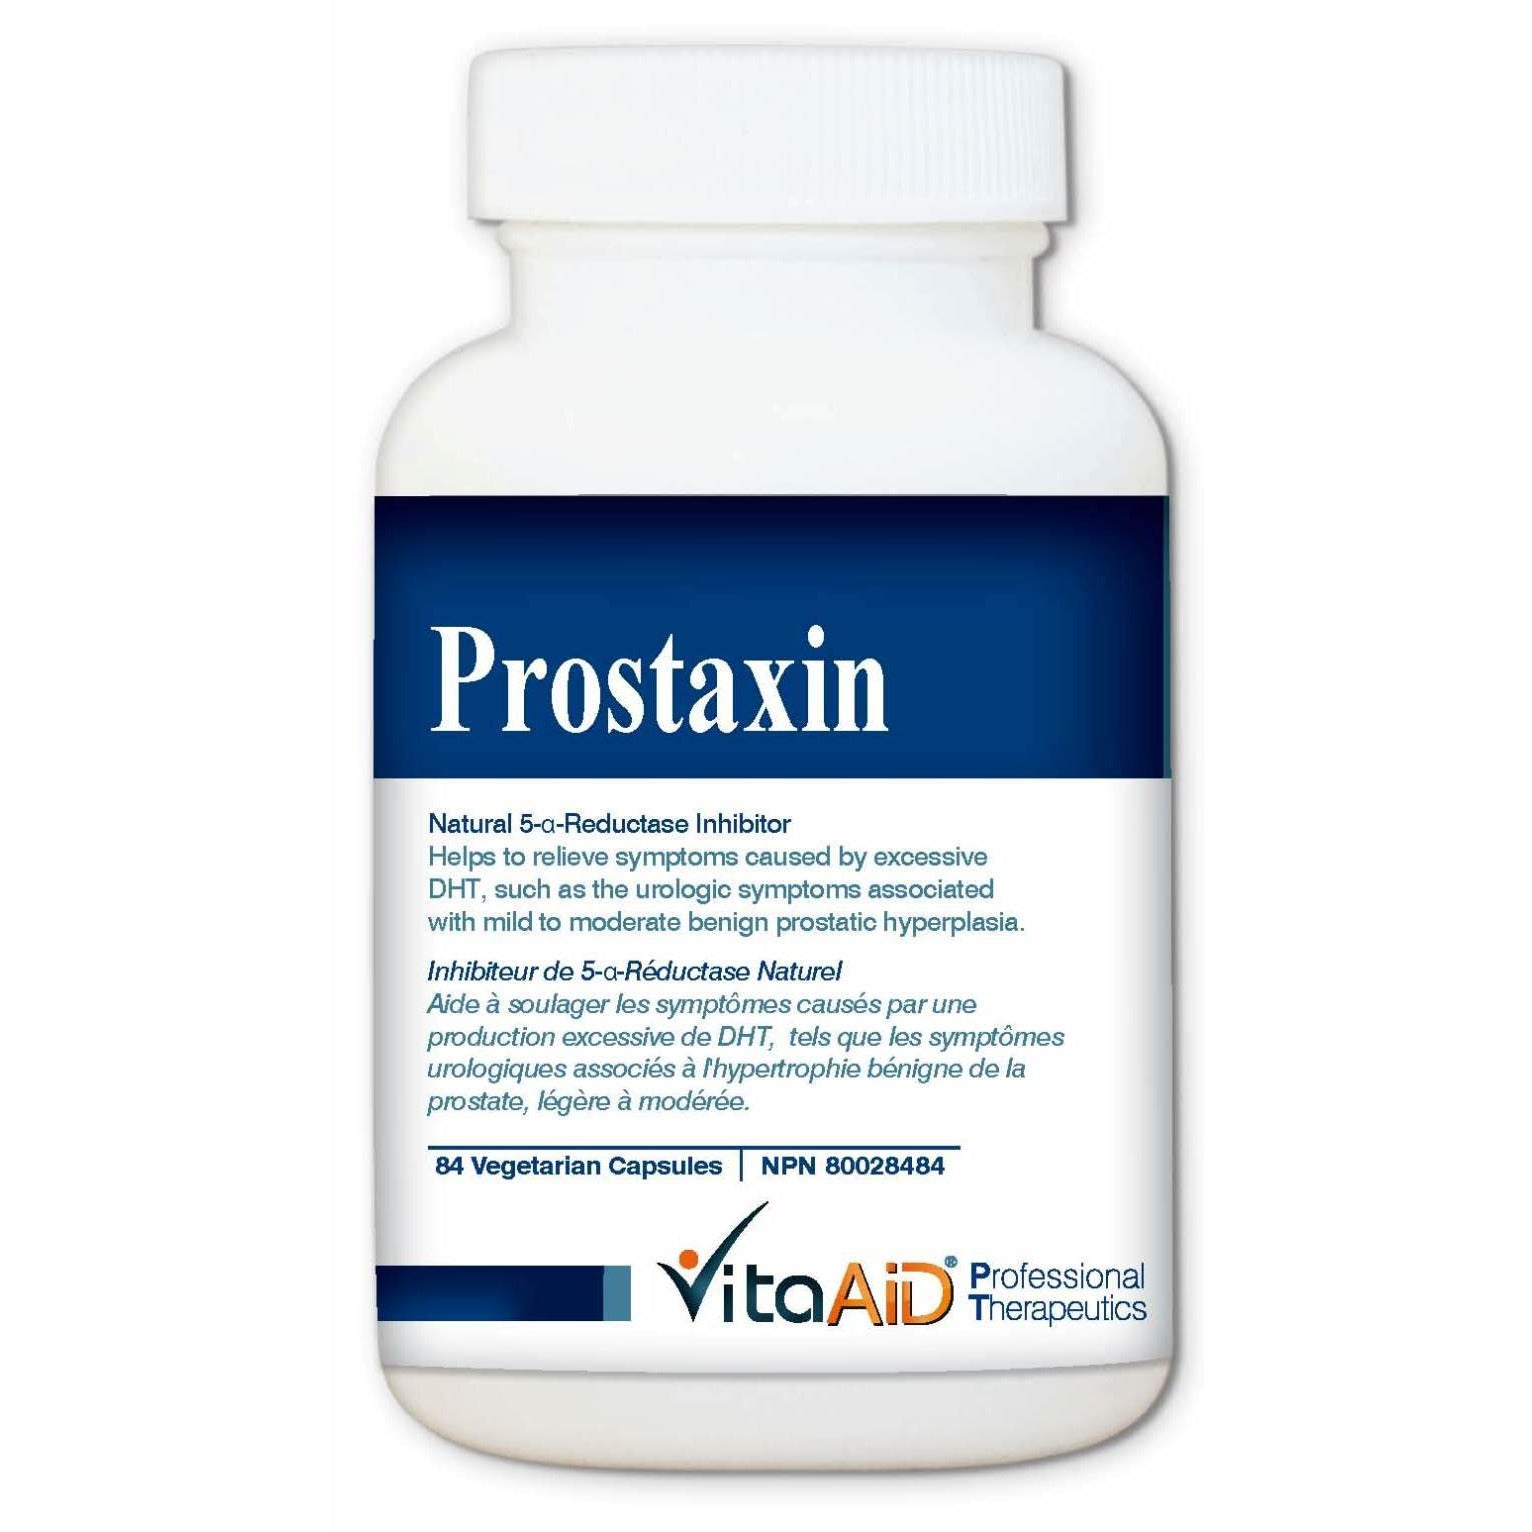 Prostaxin Relieves BPH Urological Symptoms and Inhibits Prostate Hyperplasia 84 veg caps - iwellnessbox